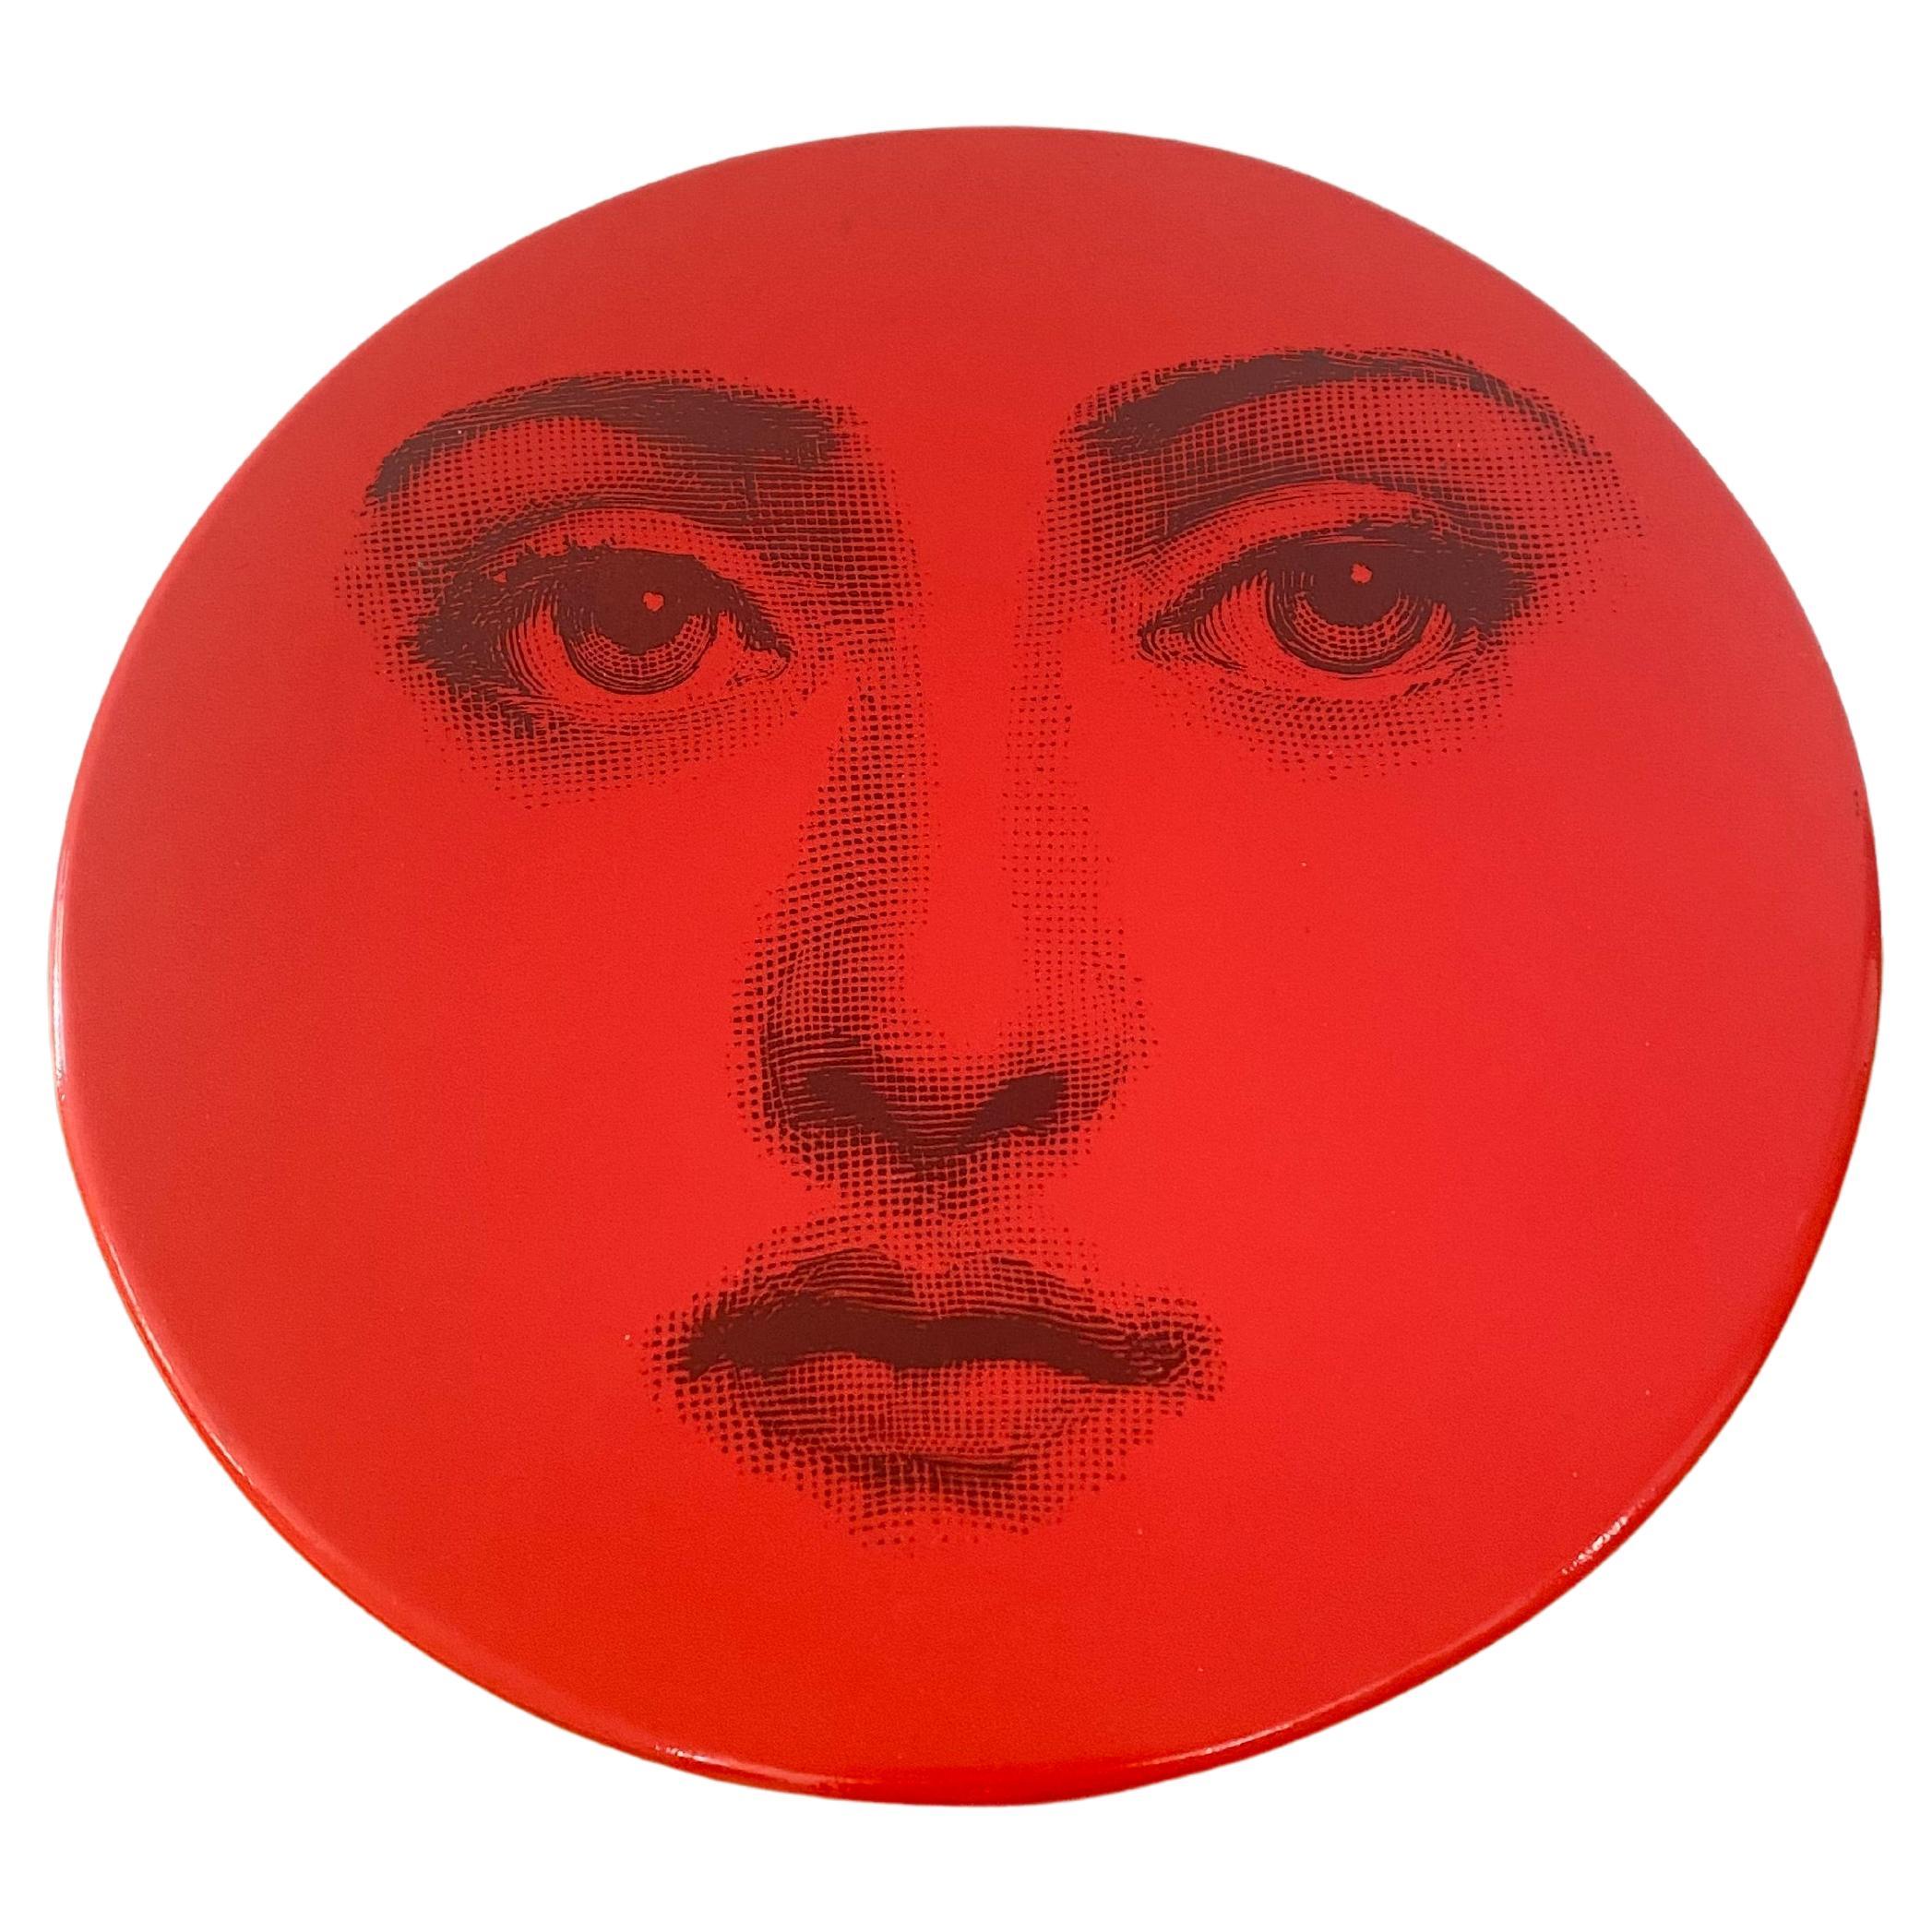 Is Fornasetti hand painted?